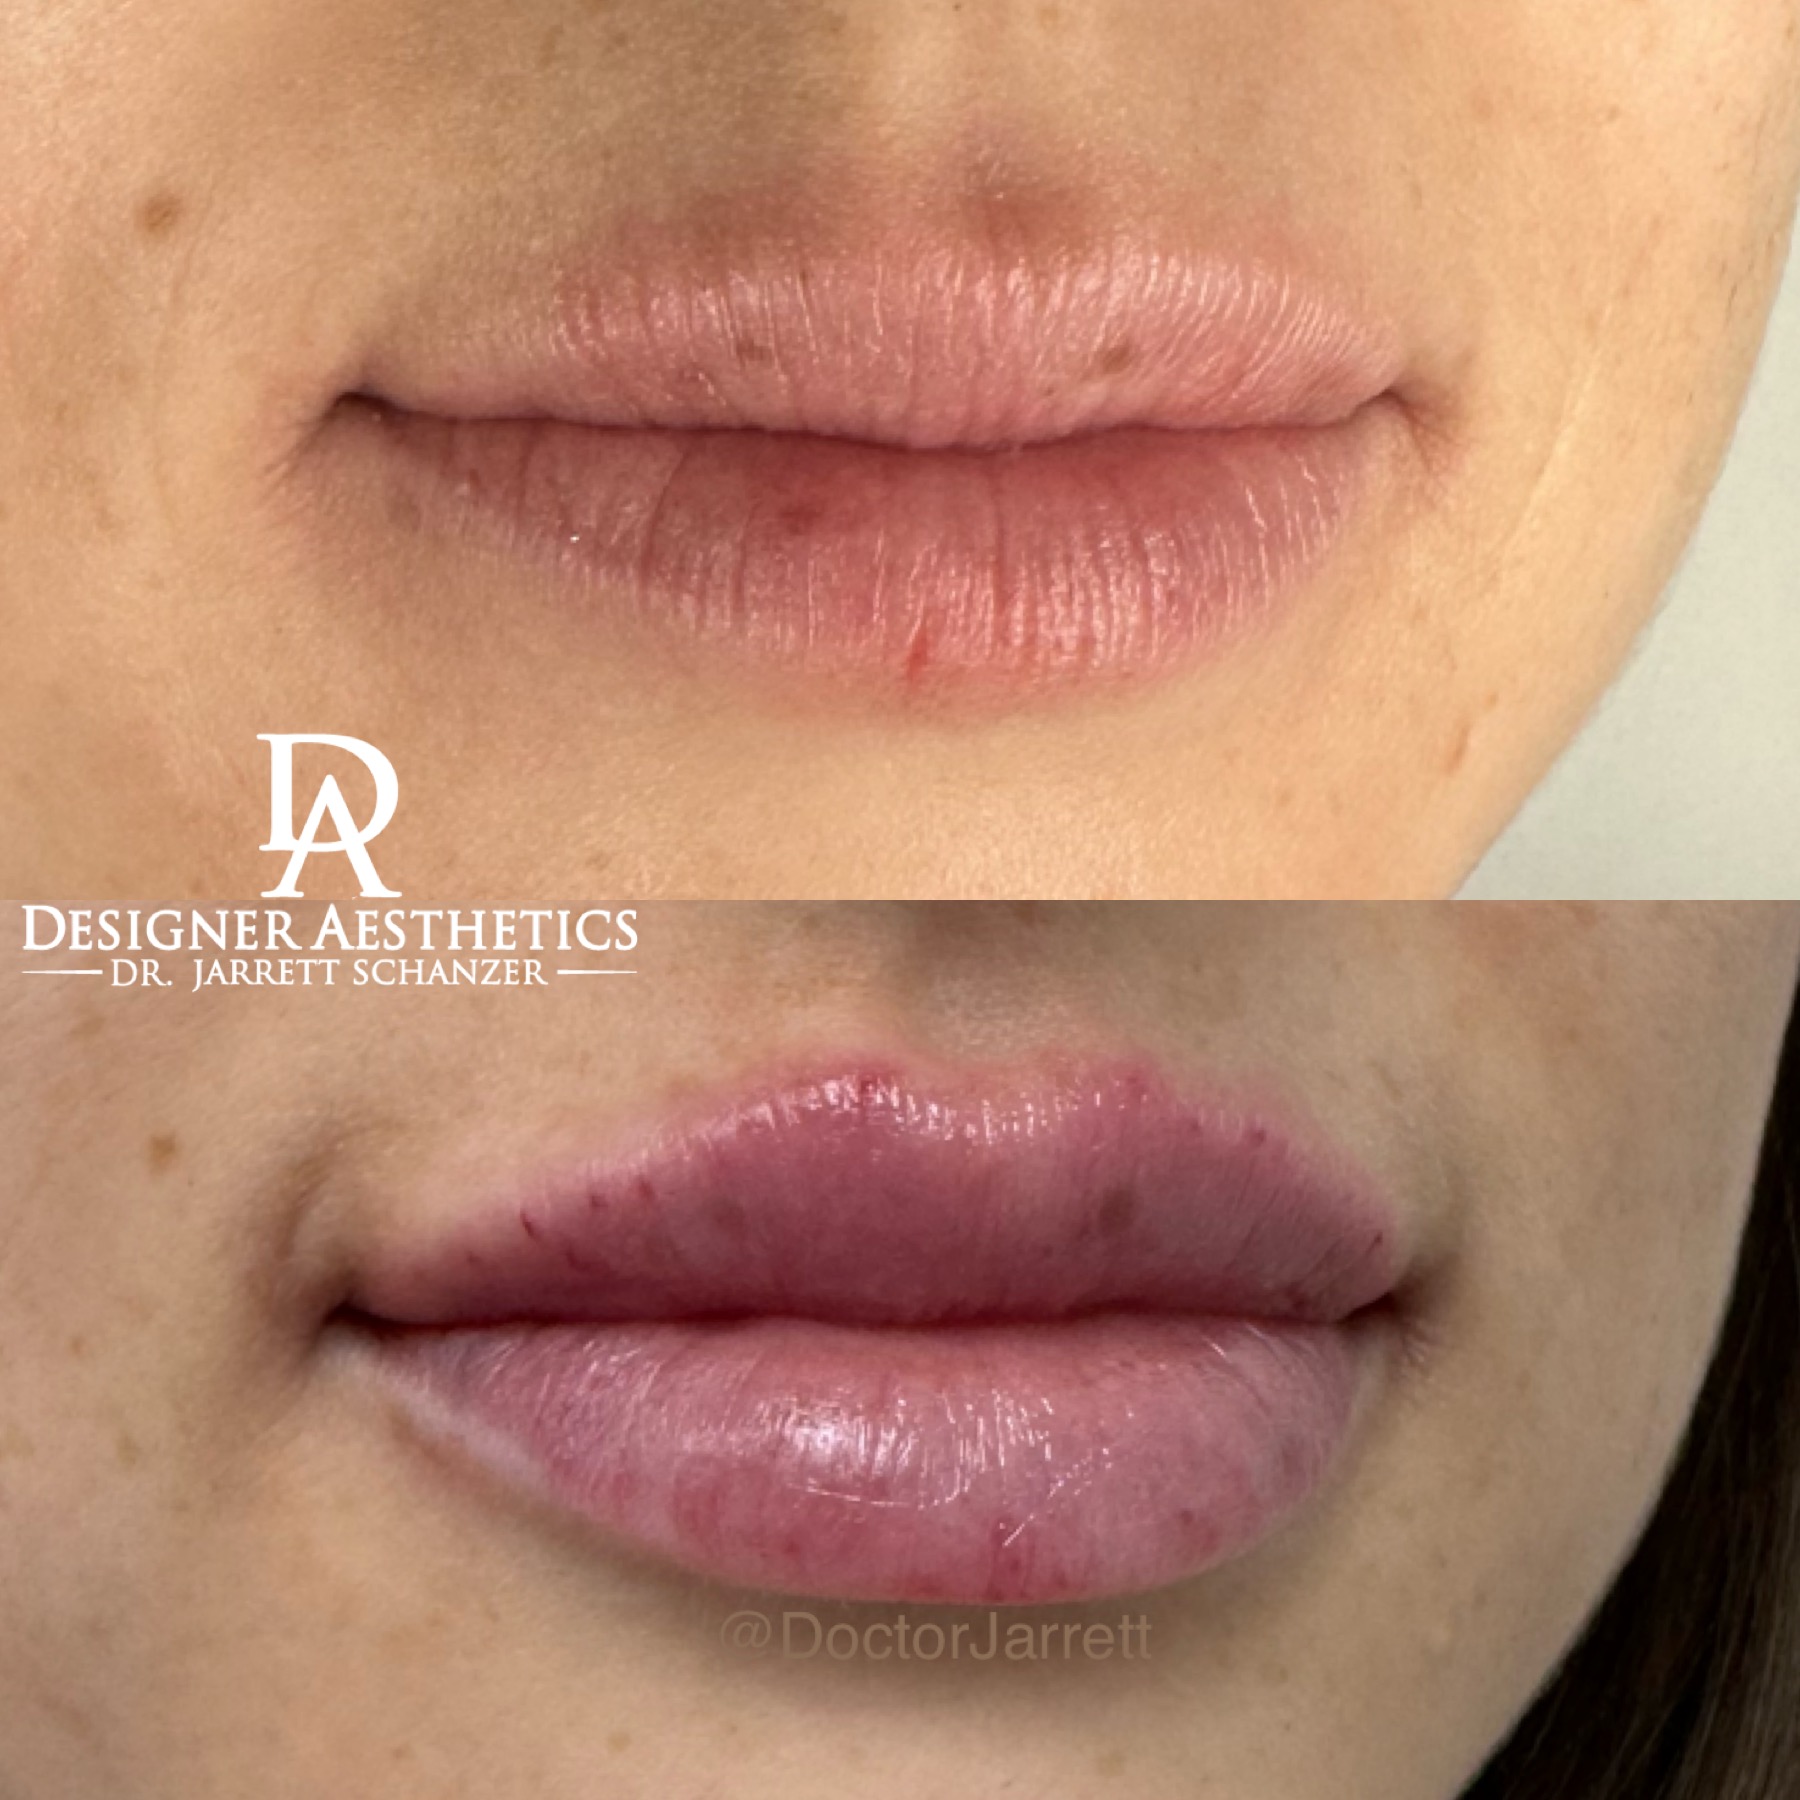 Lips Miami New york injections filler lip flip tox lips kissable americas best doctor jarrett schanzer perfect lips perfect smile perfection